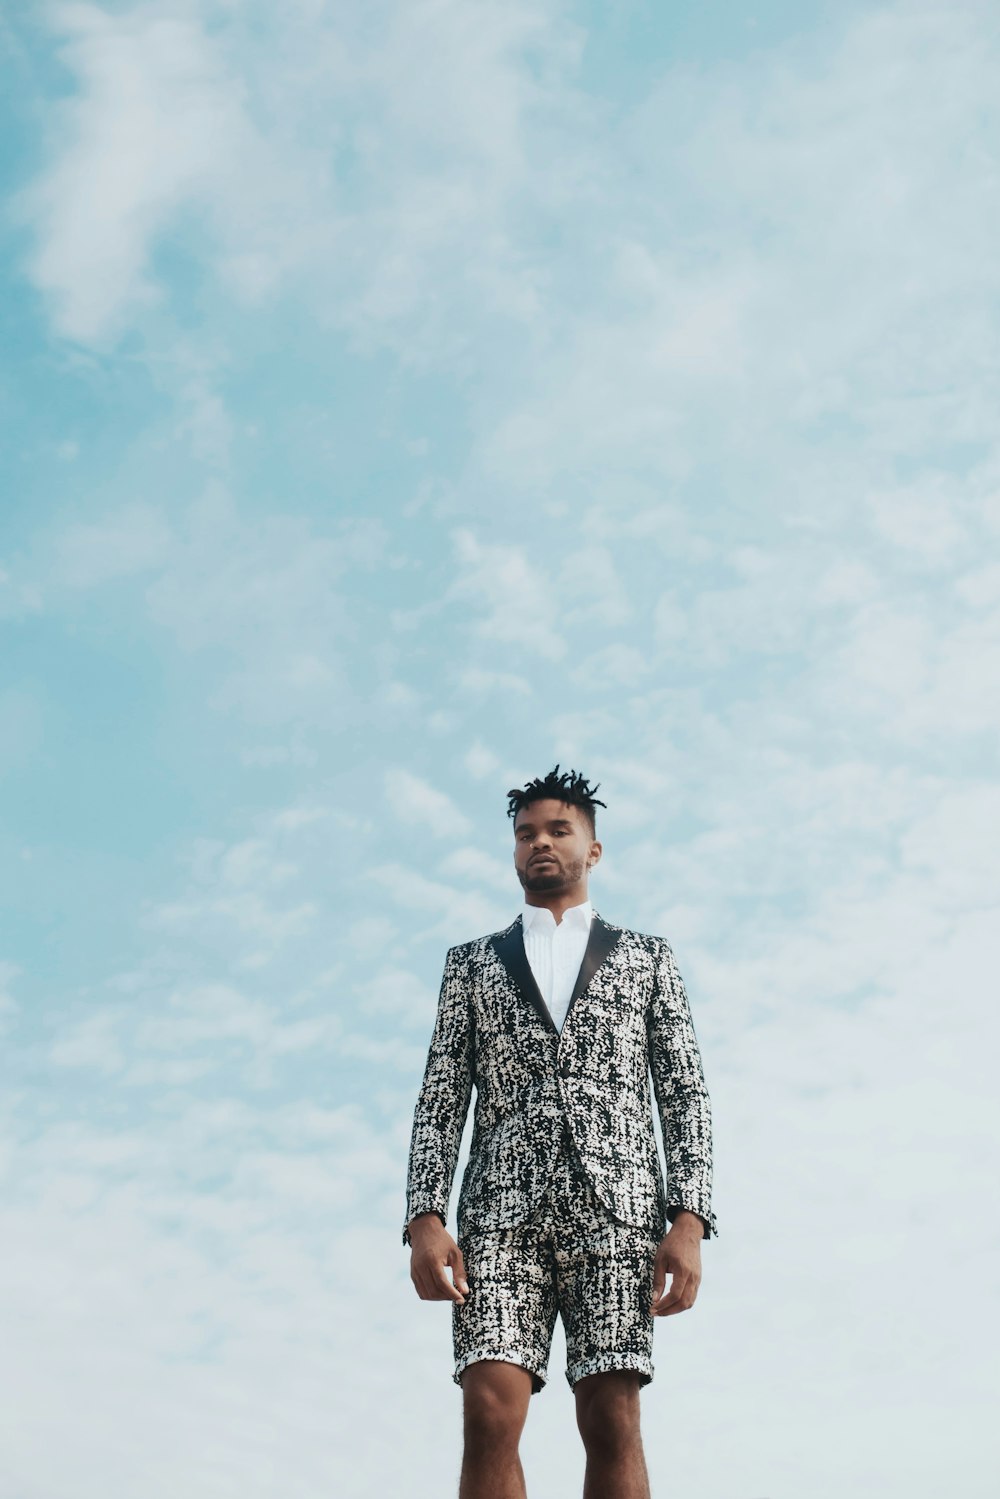 man in black and white floral suit standing under white clouds during daytime